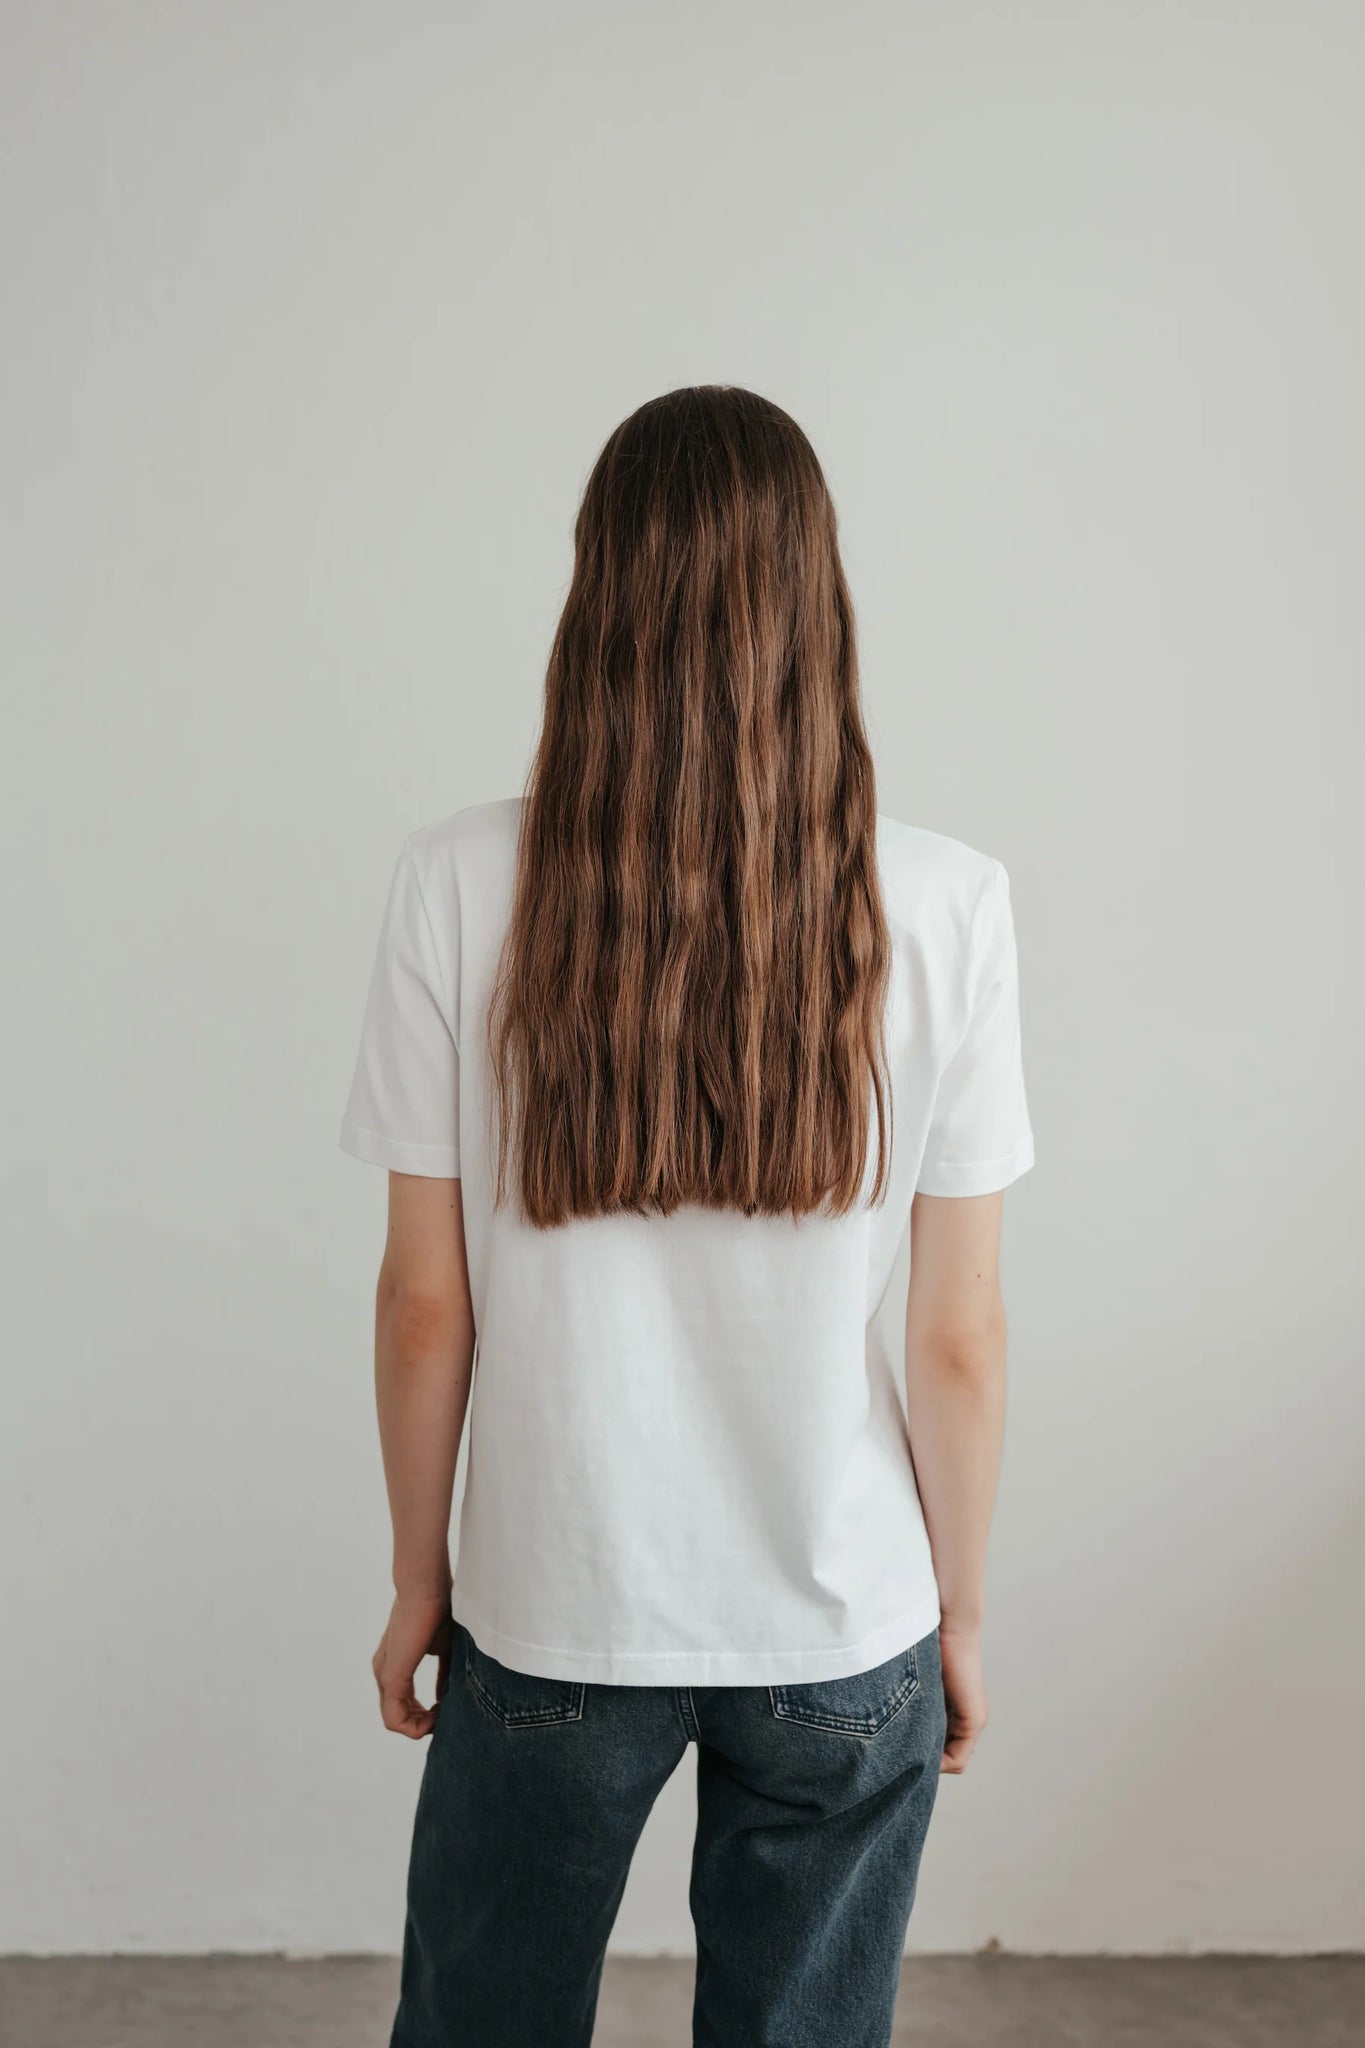 Fitted t-shirt in white by sonho stories